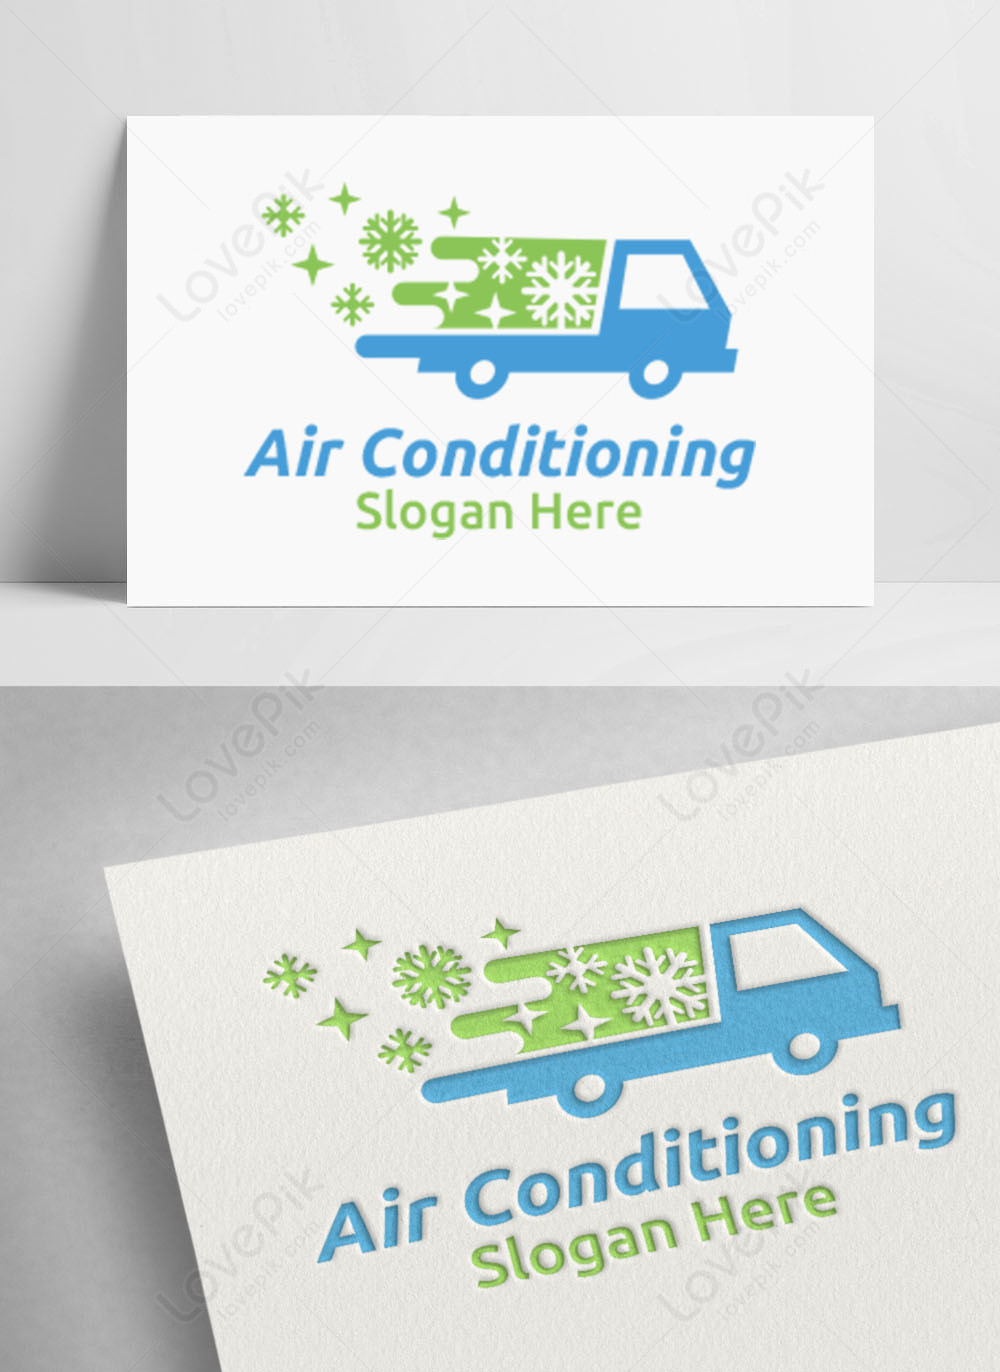 Car Snow Air Conditioning Logo Template Image Picture Free Download Lovepik Com